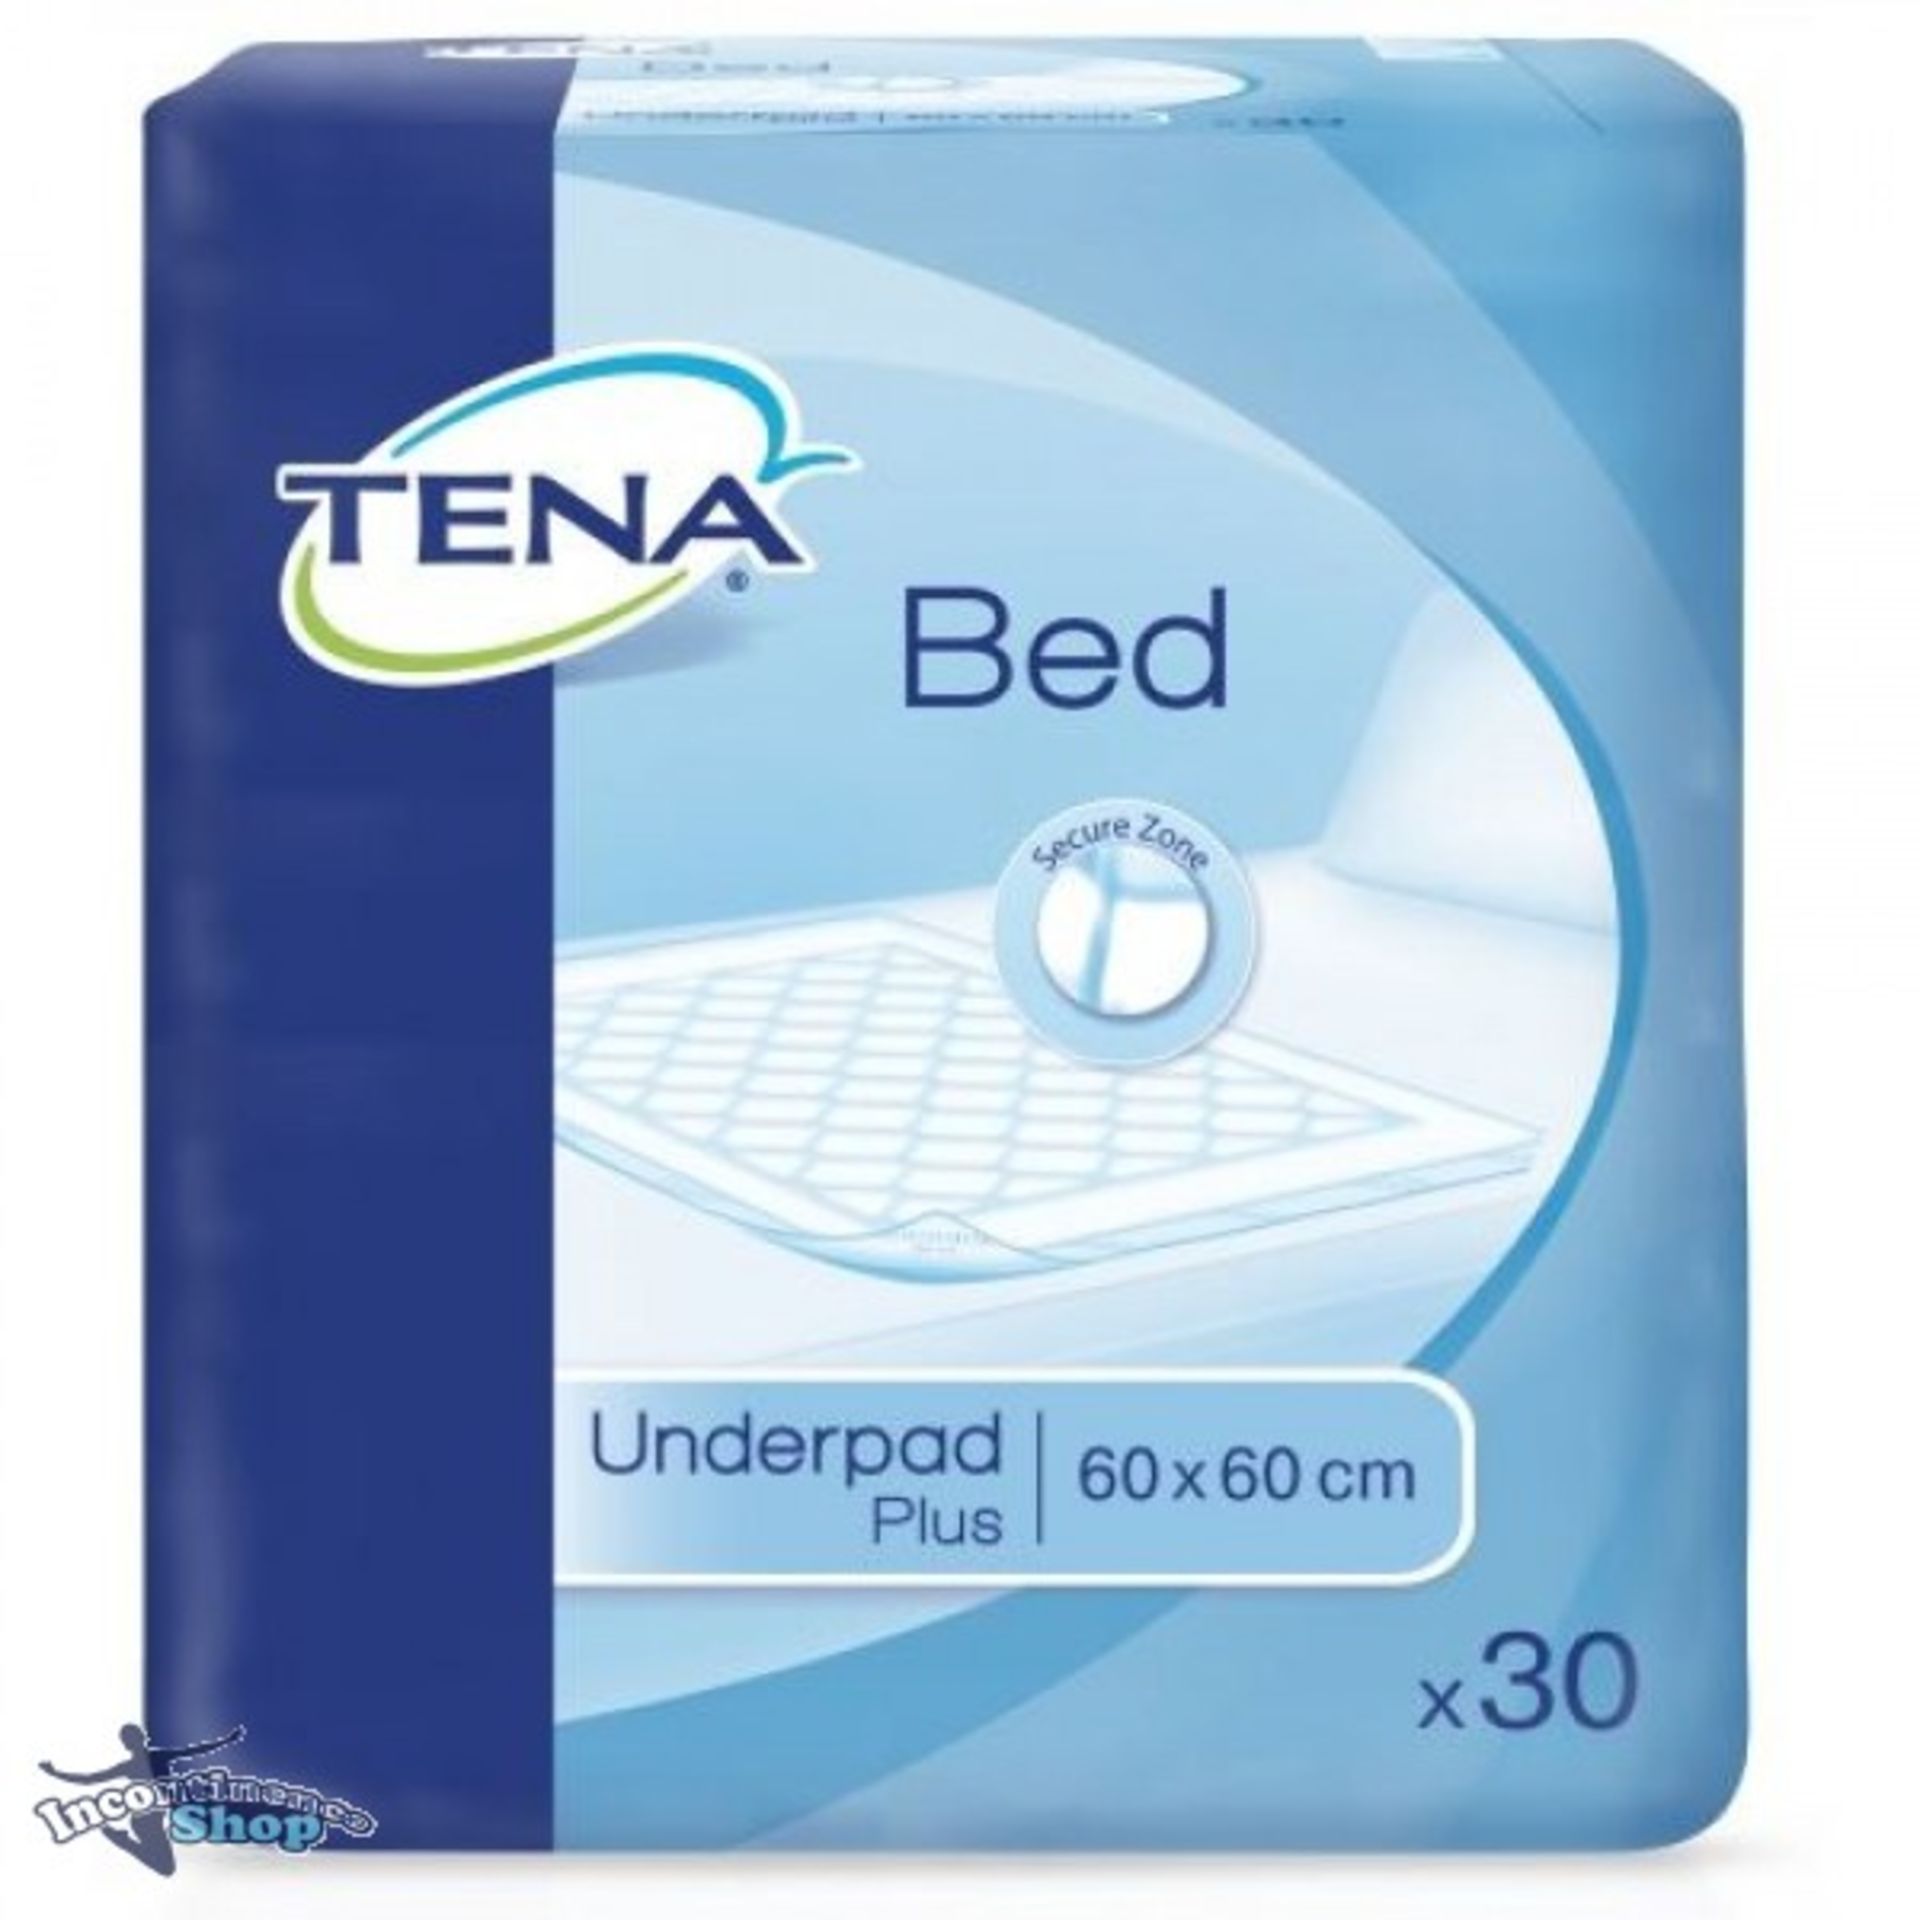 V Brand New Pack 30 Tena Bed Underpad Plus 60 X 60cm ISP £9.49 (ebay) X 2 YOUR BID PRICE TO BE